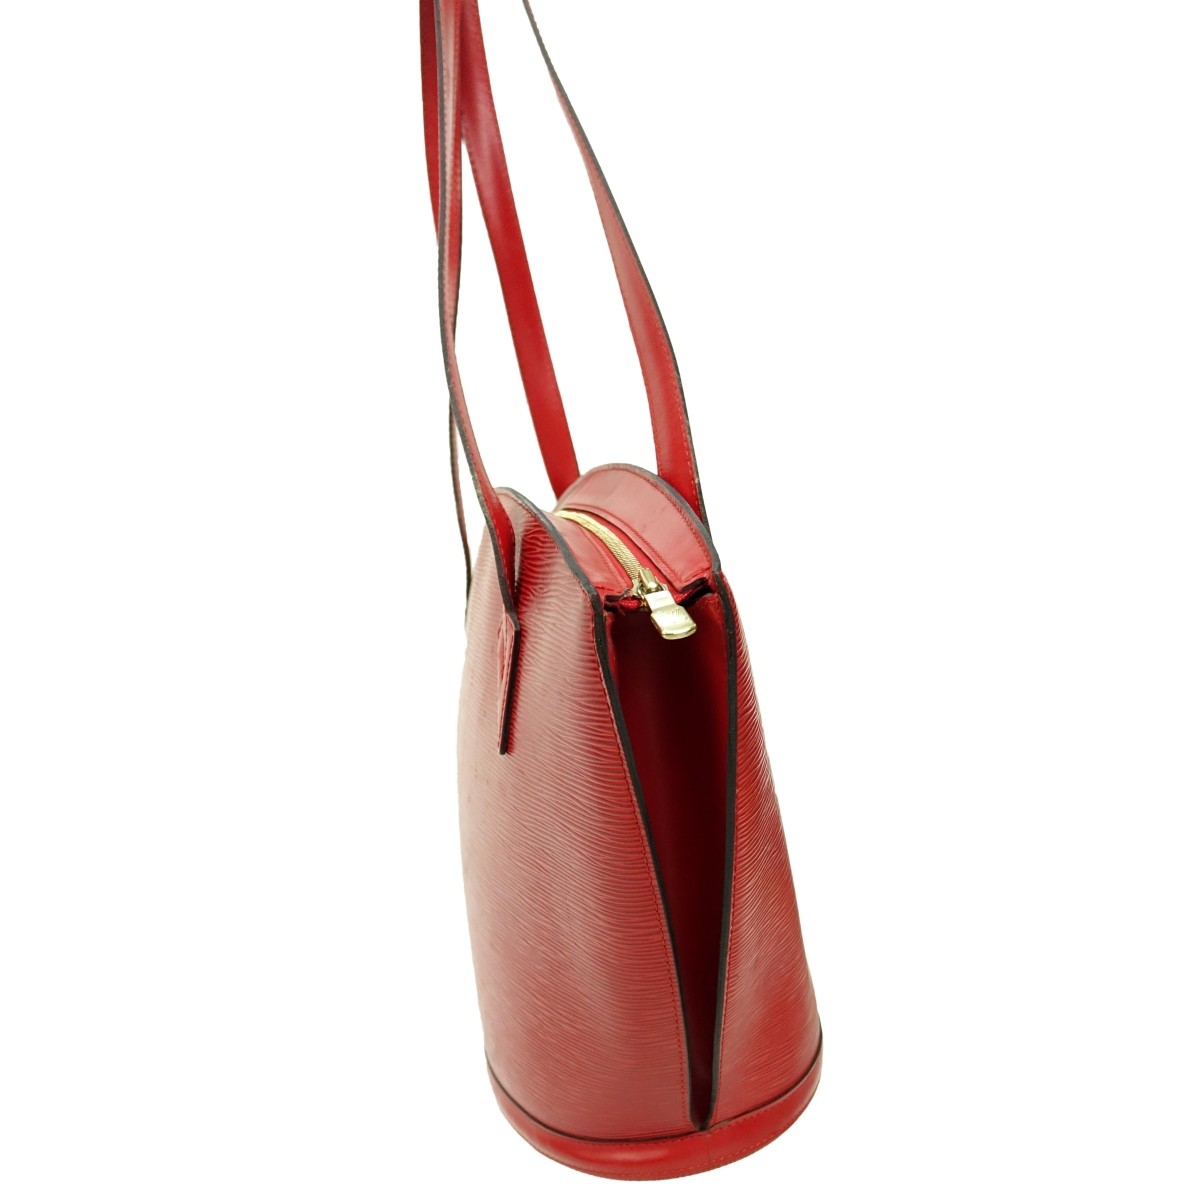 Louis Vuitton Red Epi St-Jacques Shopping GM Tote